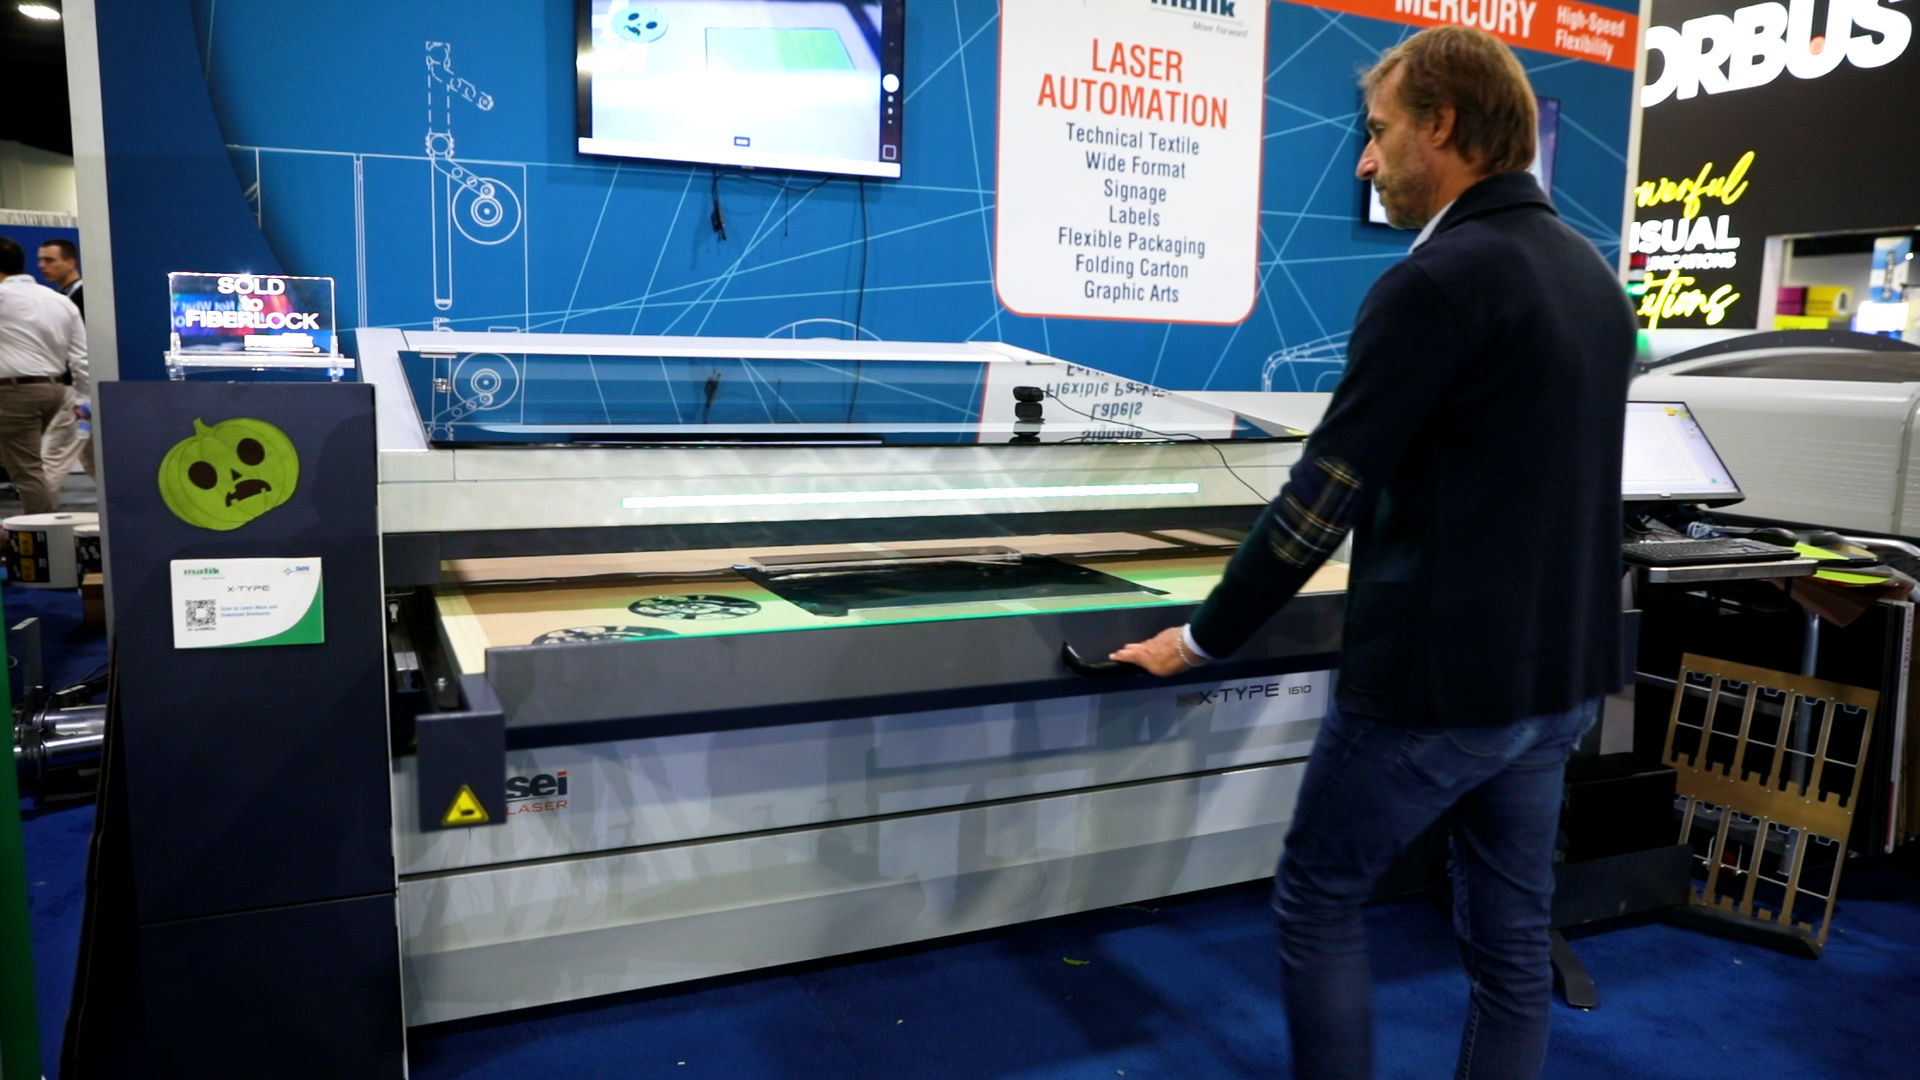 SEI Laser/Matik Introduces the X-Type Laser Plotter to North America